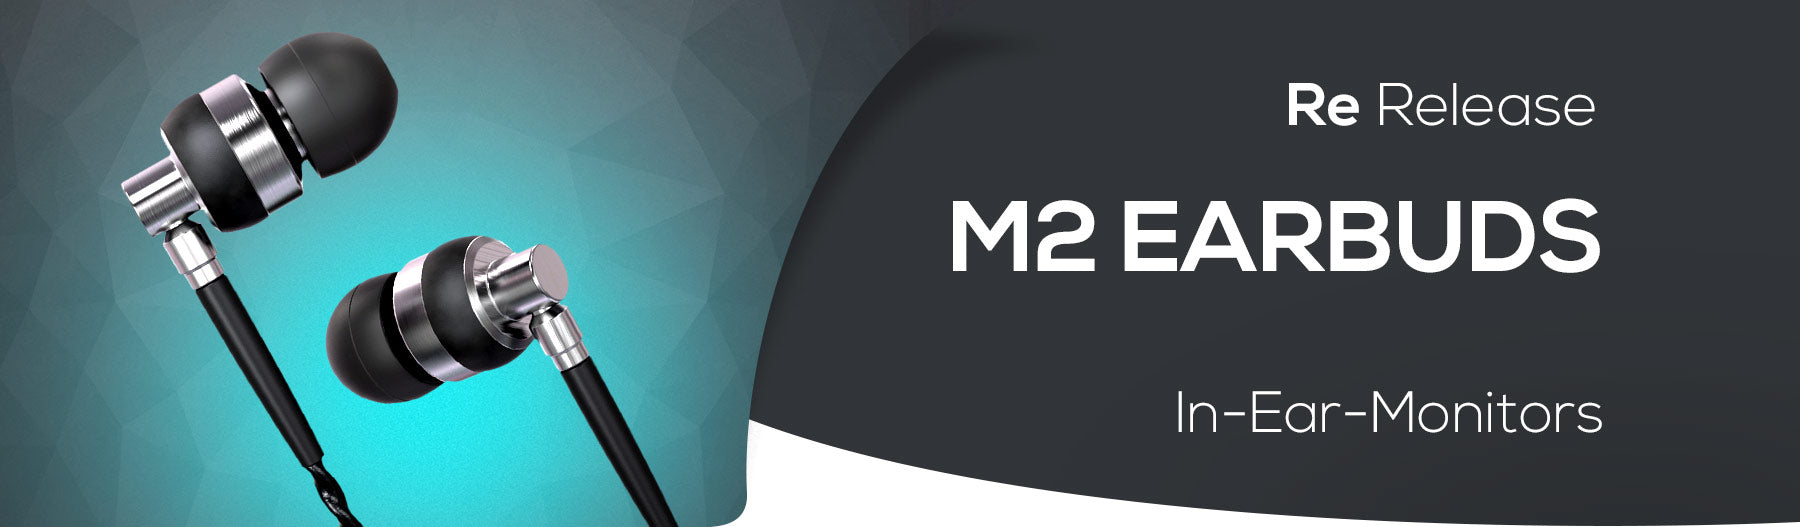 M2 Earbuds - Return of a Classic